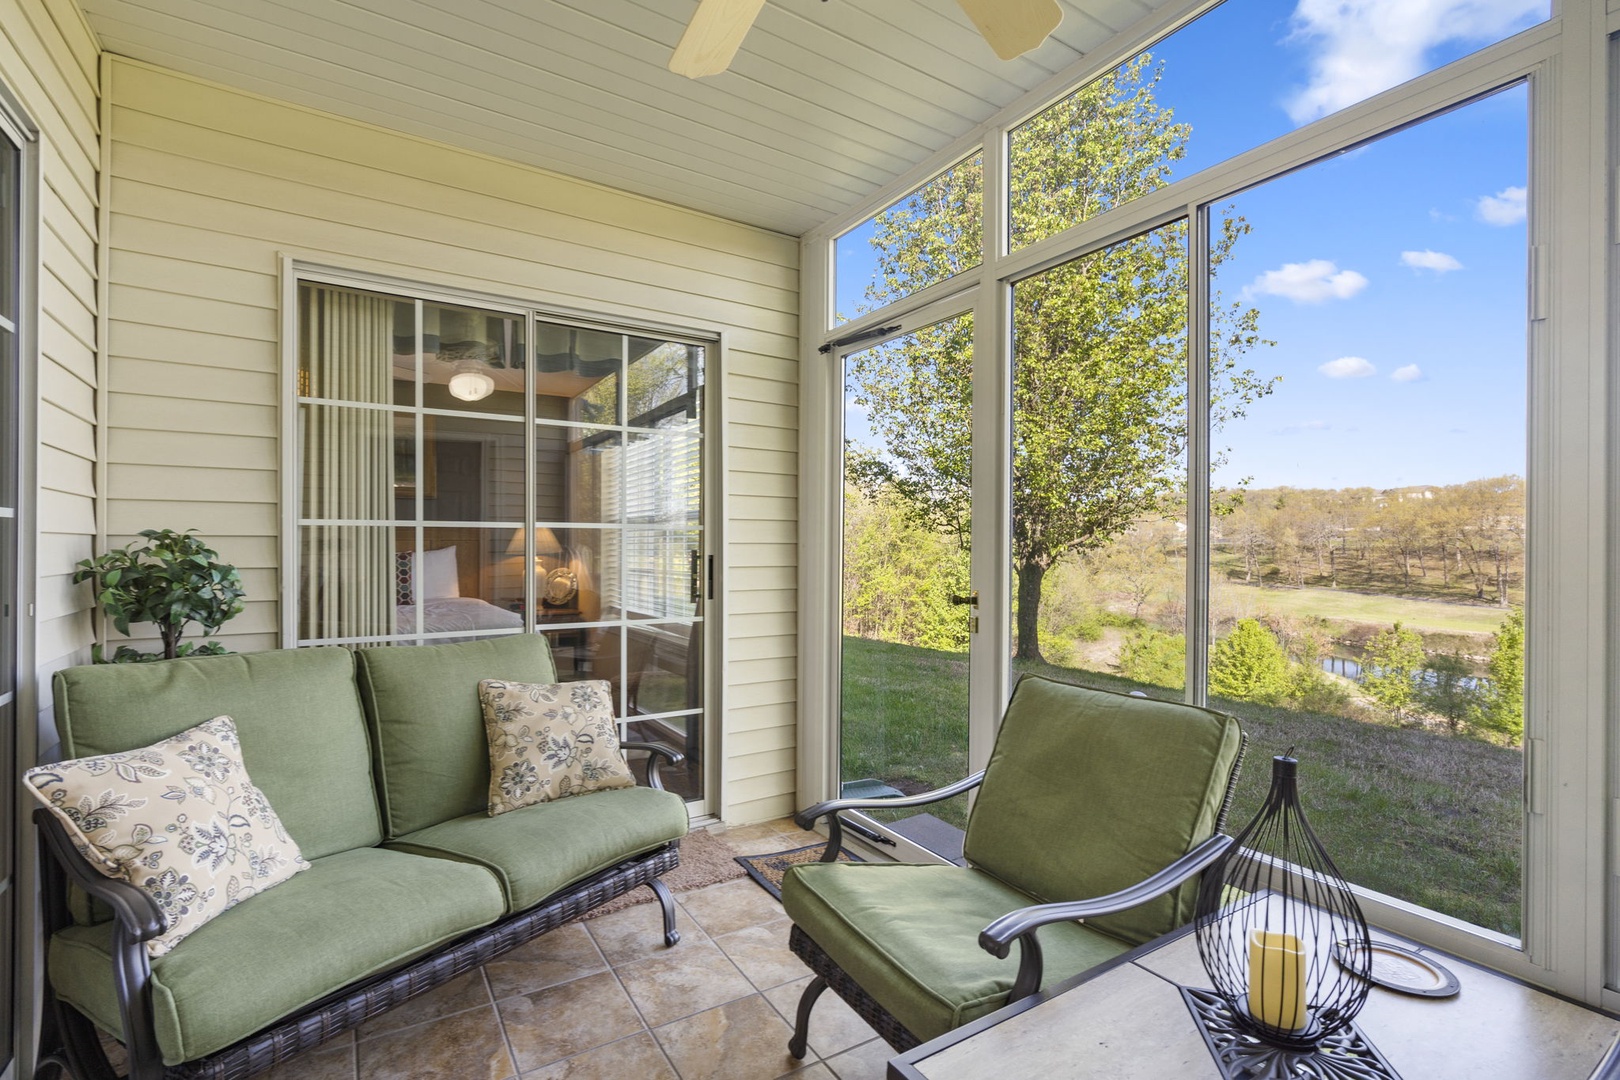 Take in the fresh air and gorgeous views while enjoying comfortable patio seating